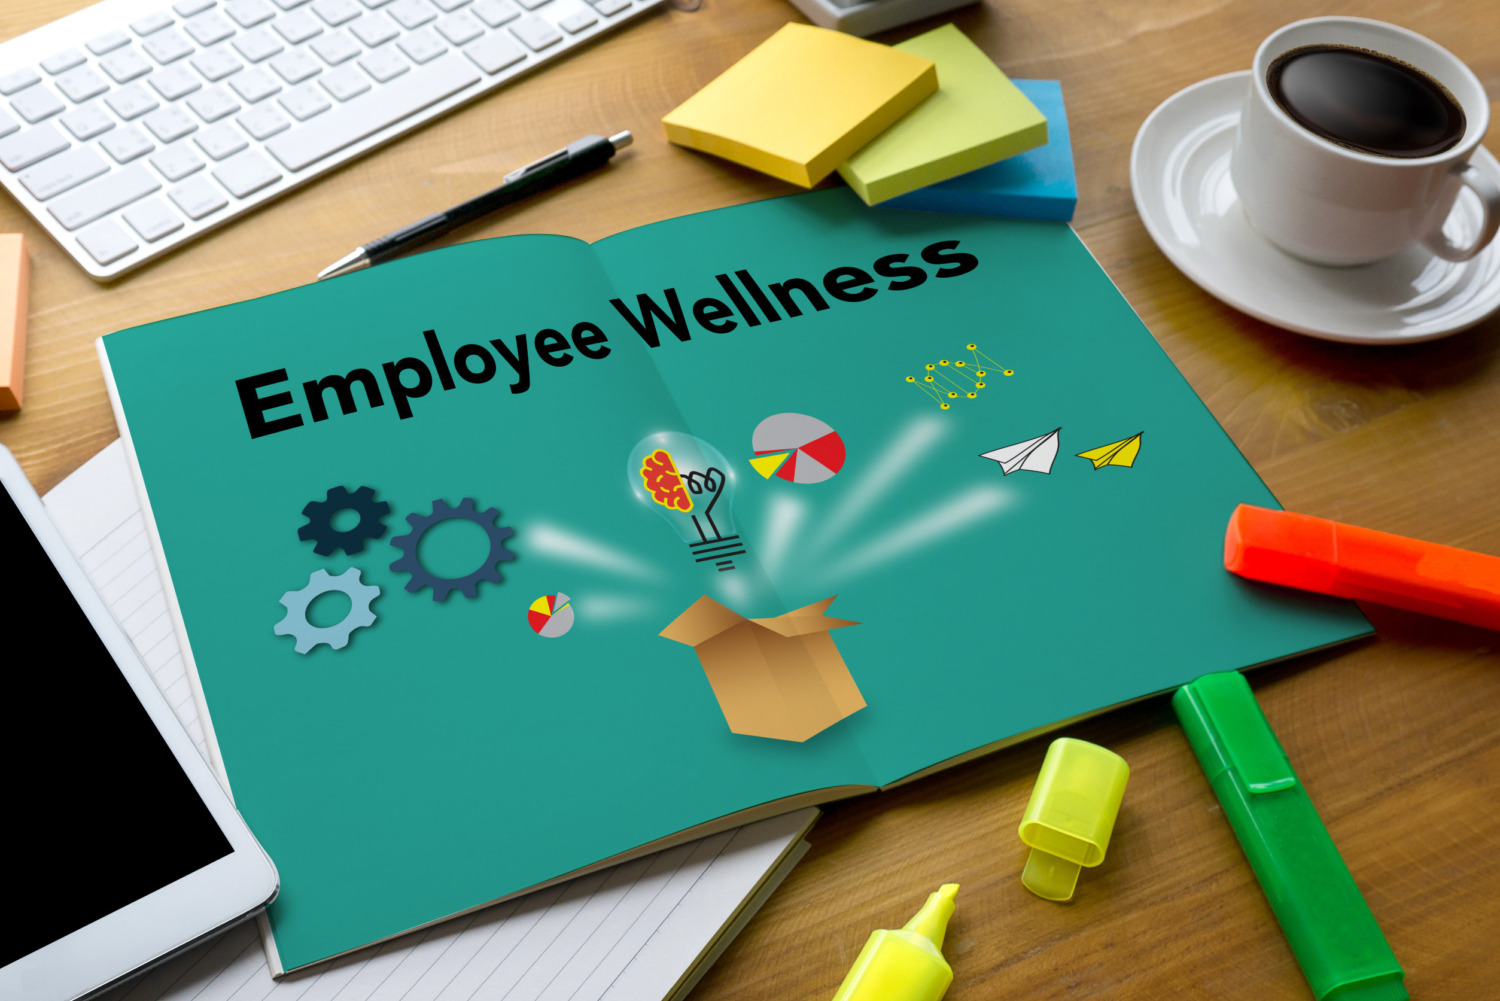 DOT Drug Testing Rules & Employee Wellness | SAP Referral Services